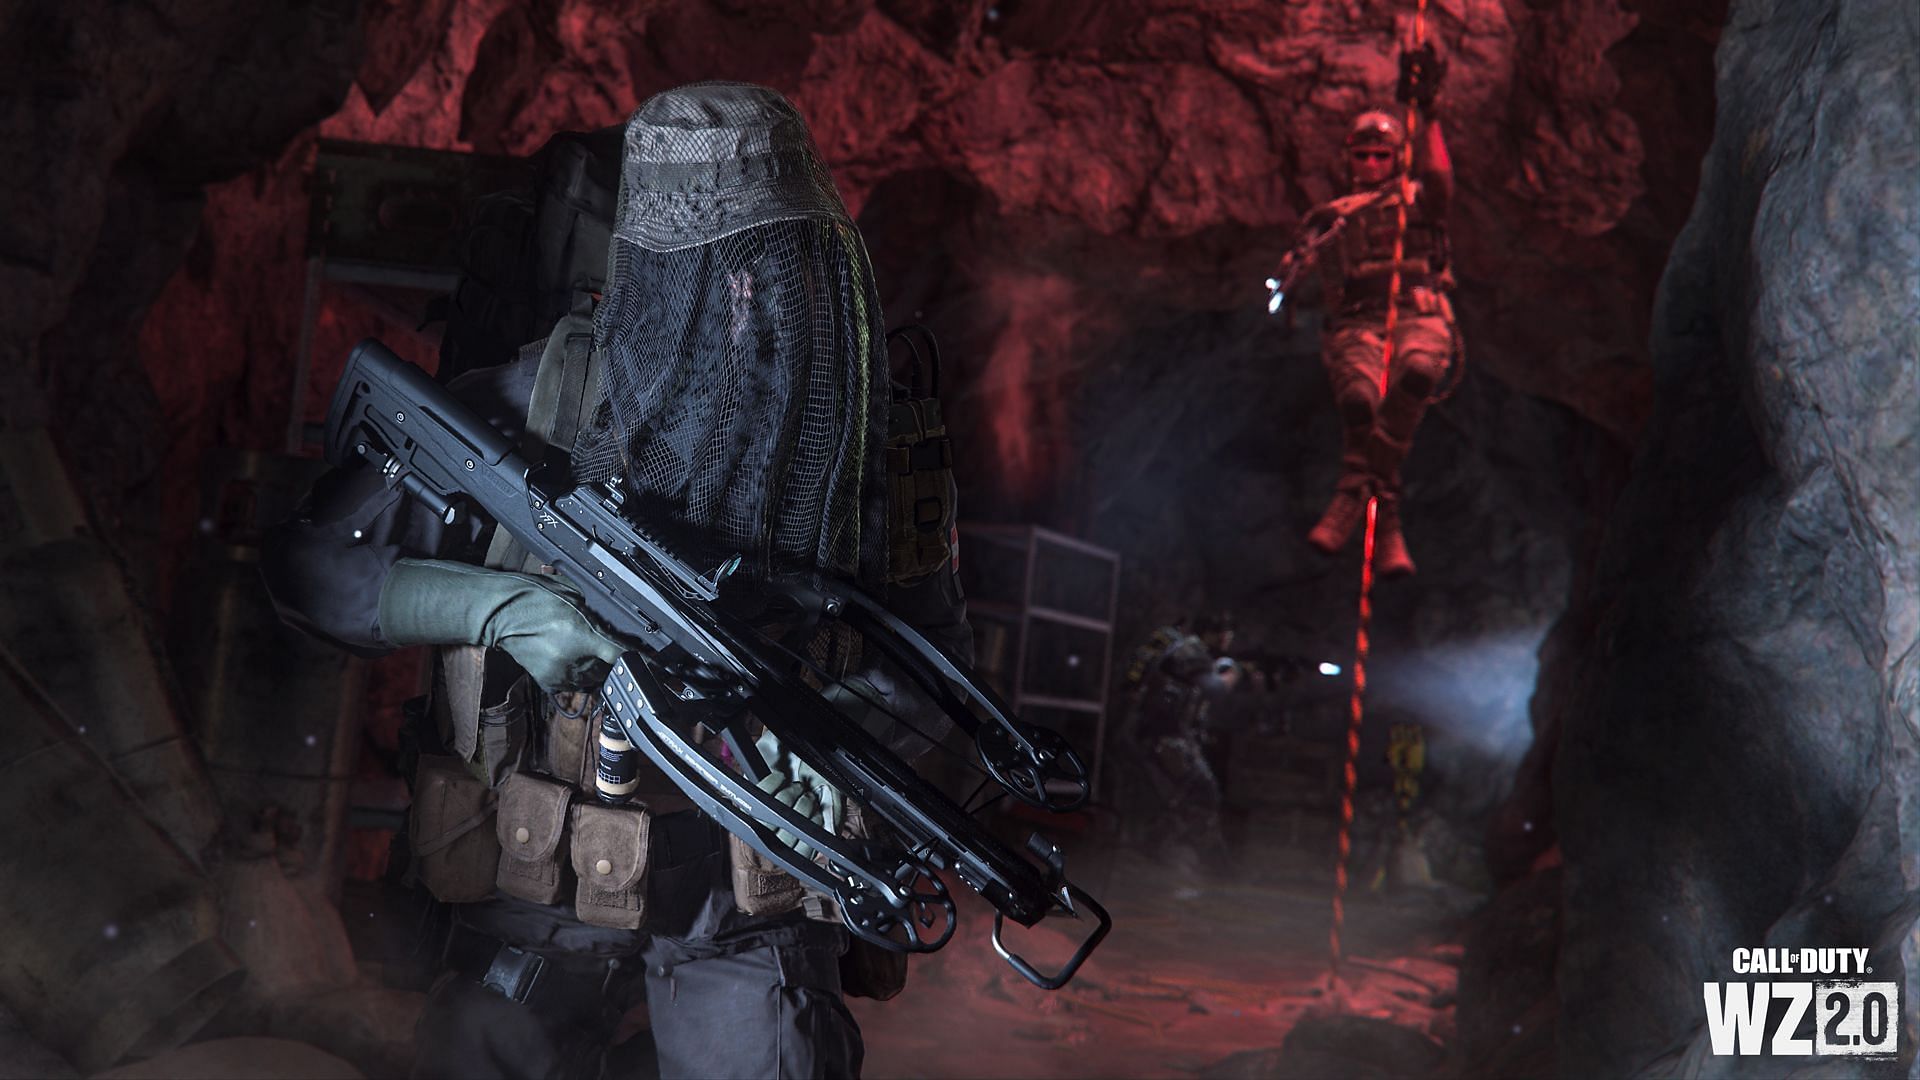 The path of Ronin will reward players with the Crossbow in Call of Duty: WZ2 (Image via Activision)